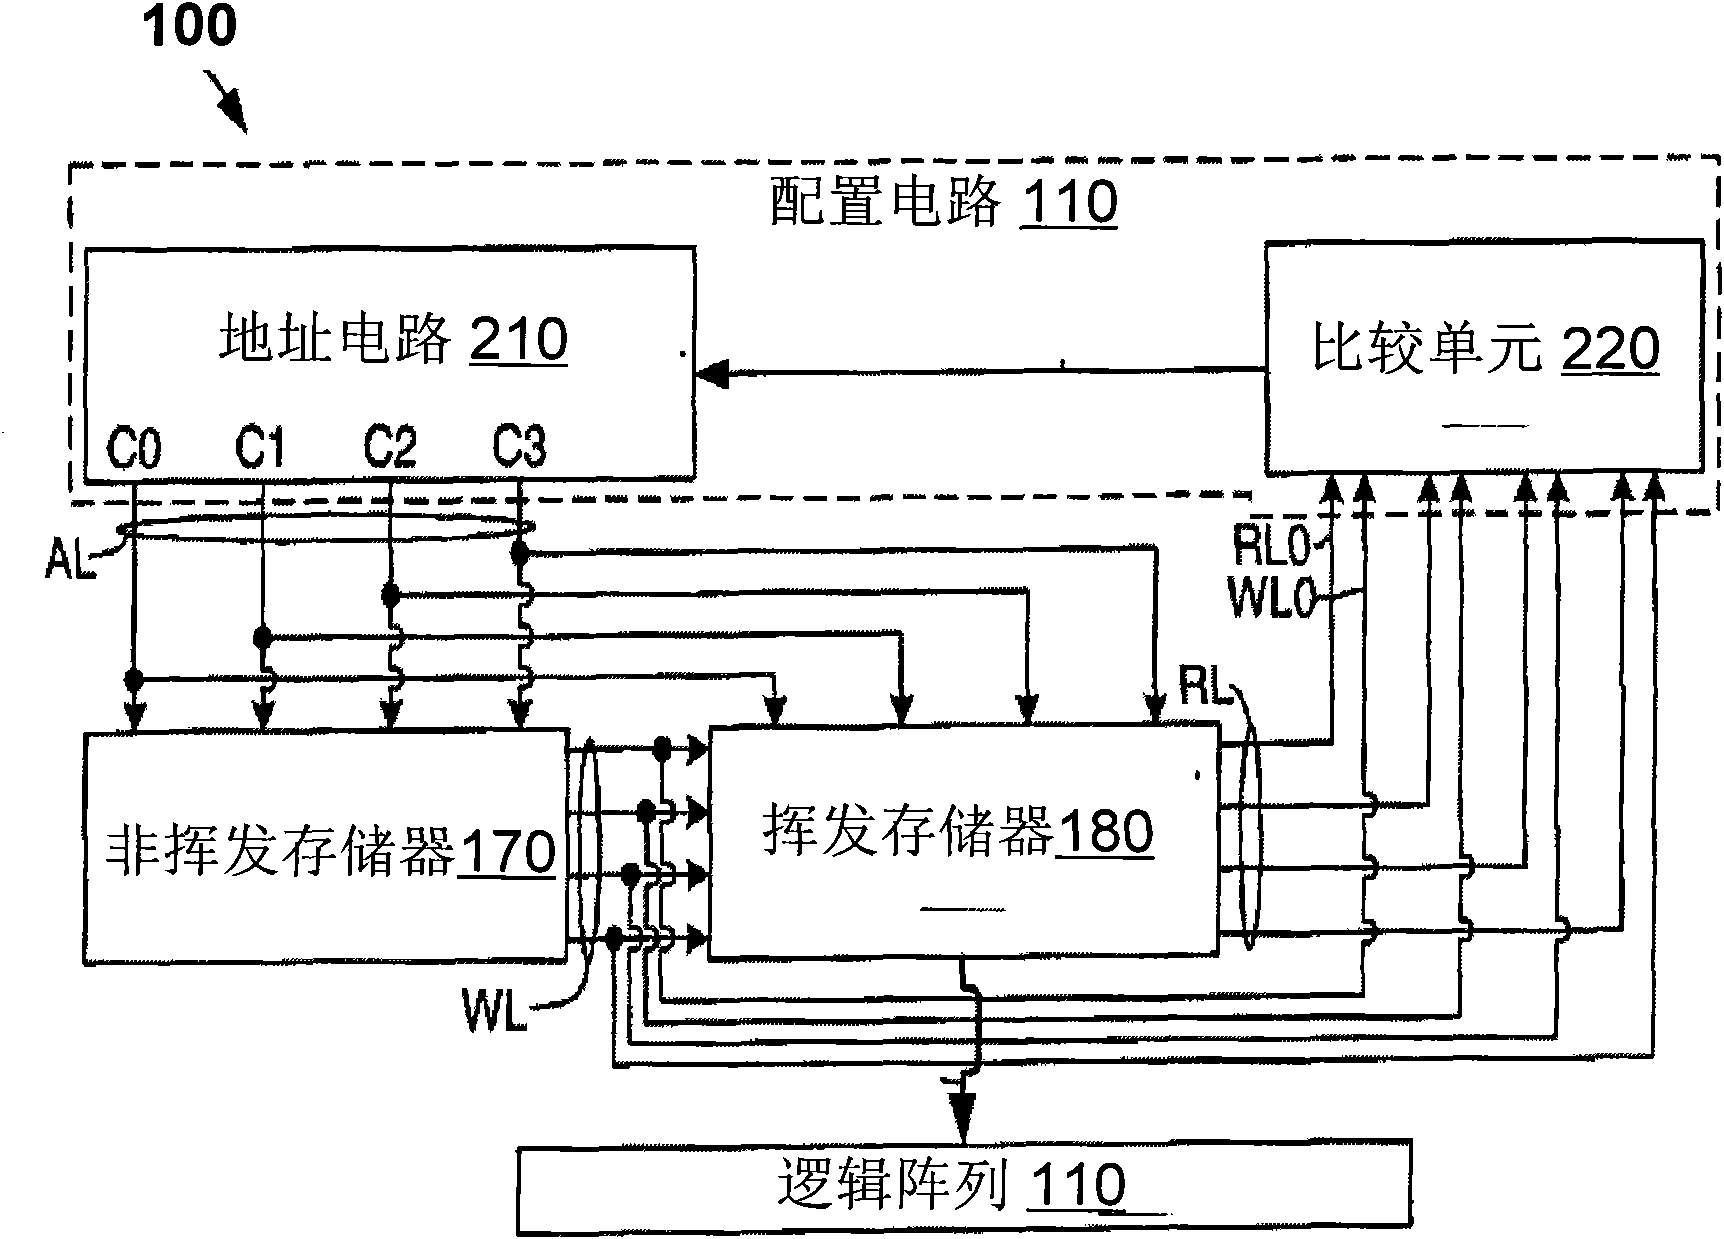 Single chip structured programmable logic device with resistance random access memory (RAM) module